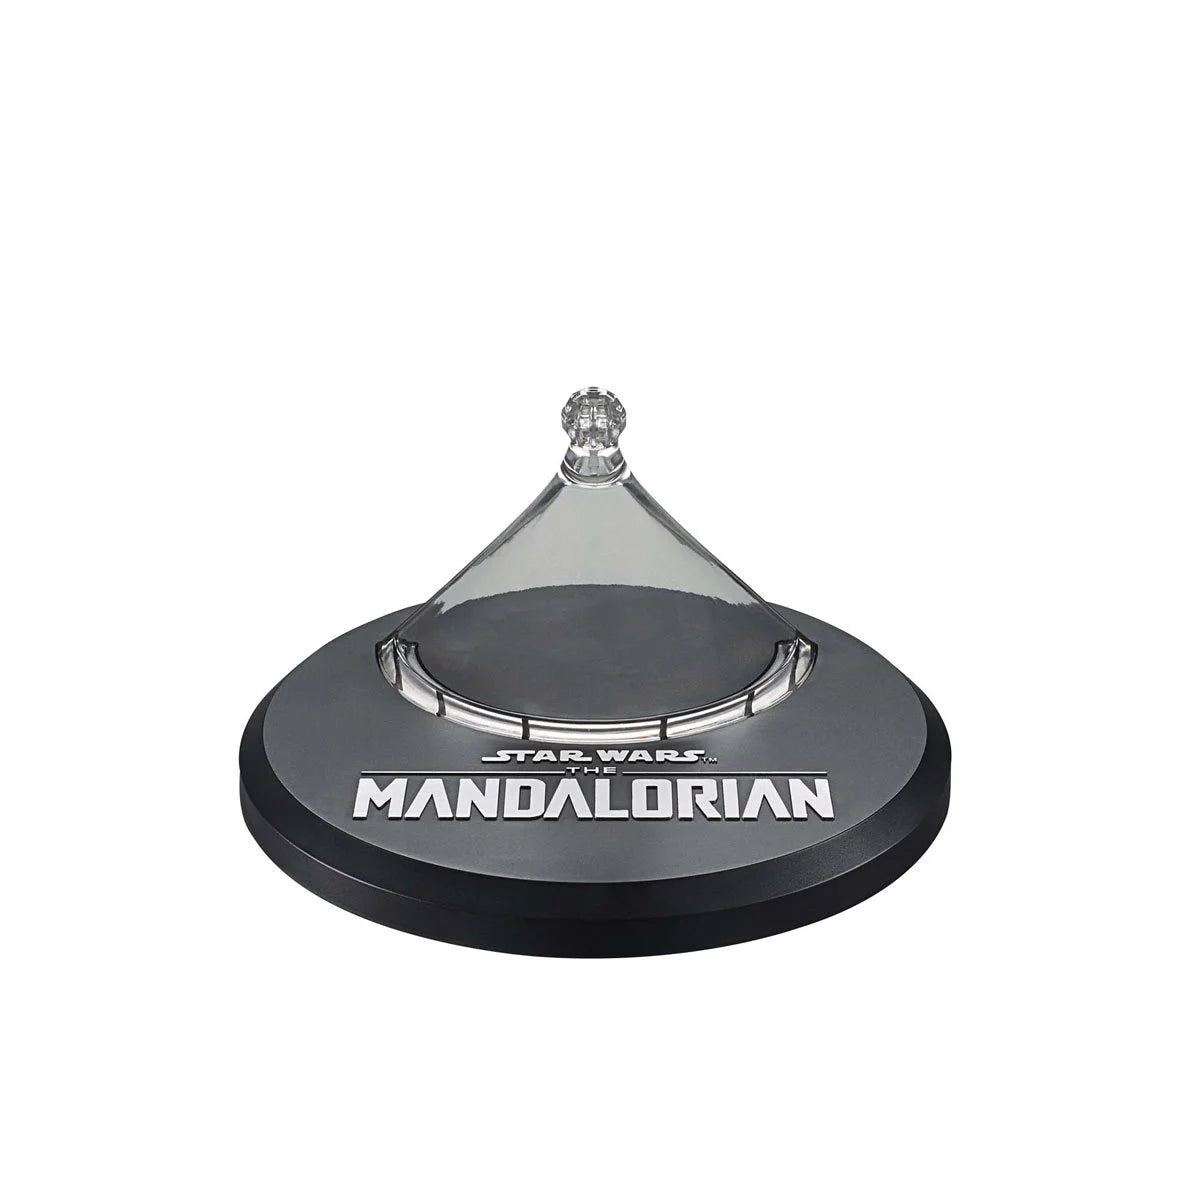 Star Wars The Vintage Collection The Mandalorian’s N-1 Starfighter Vehicle - Heretoserveyou